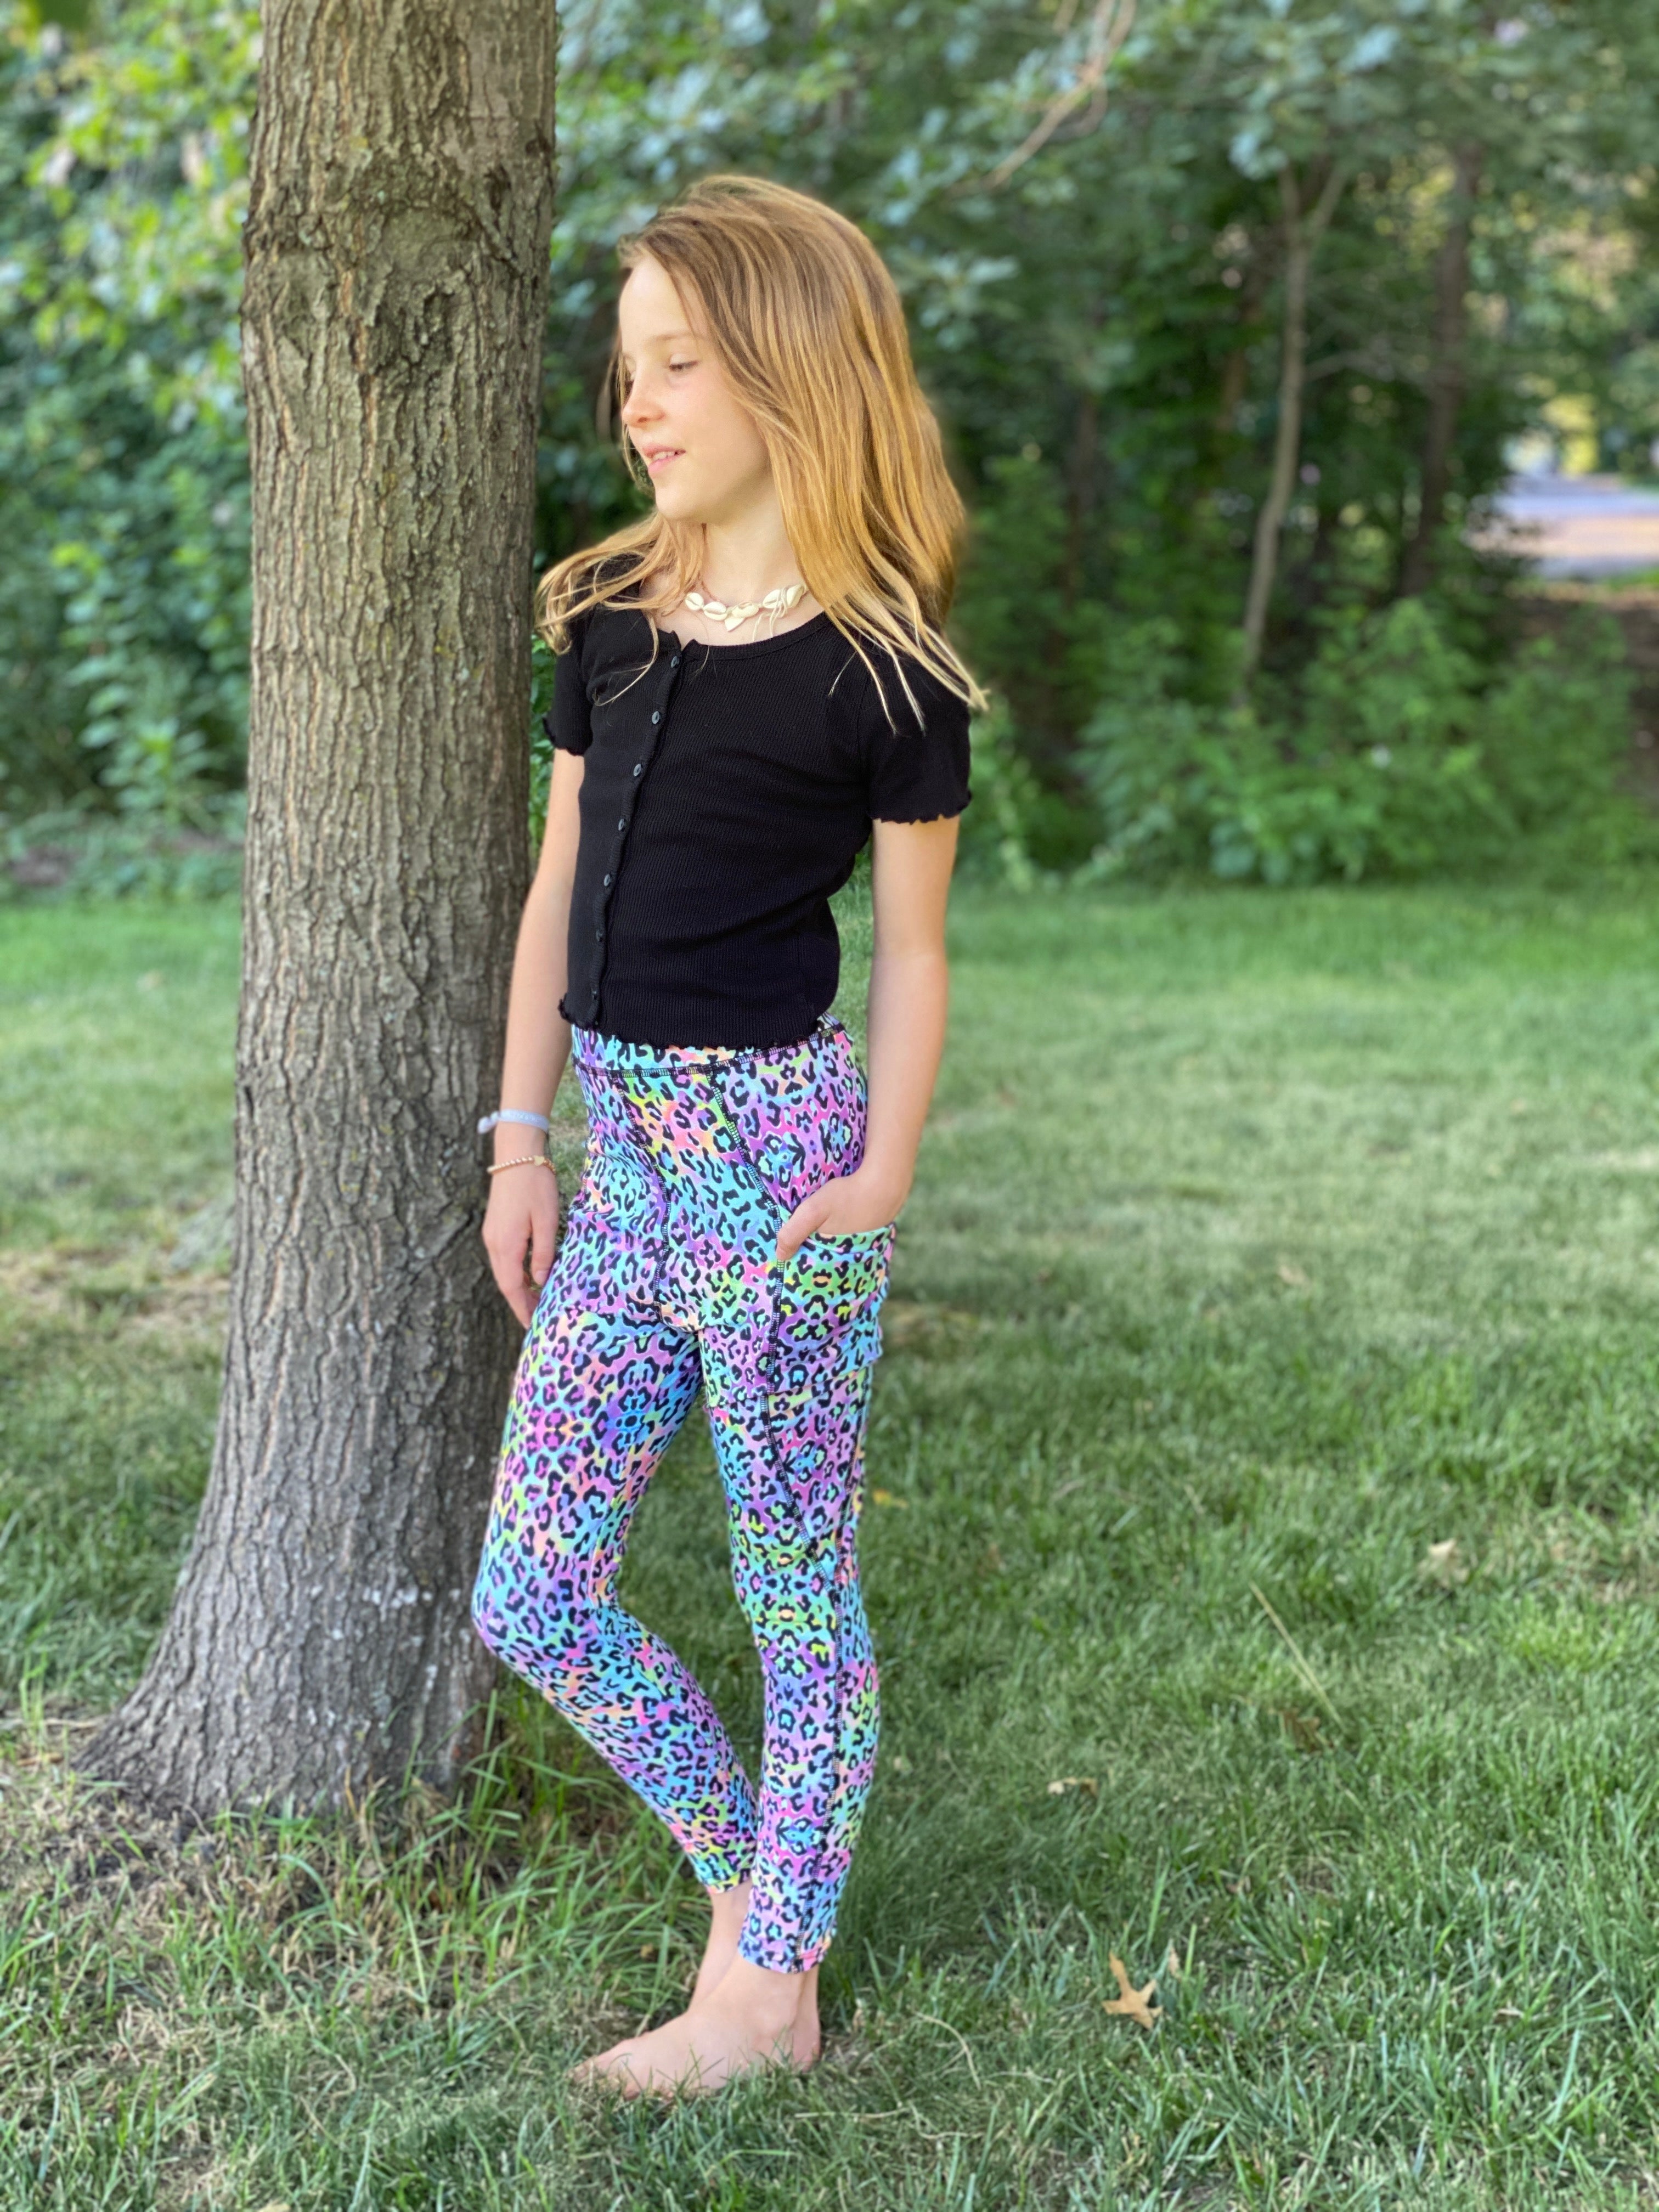 Pink and Blue leopard leggings